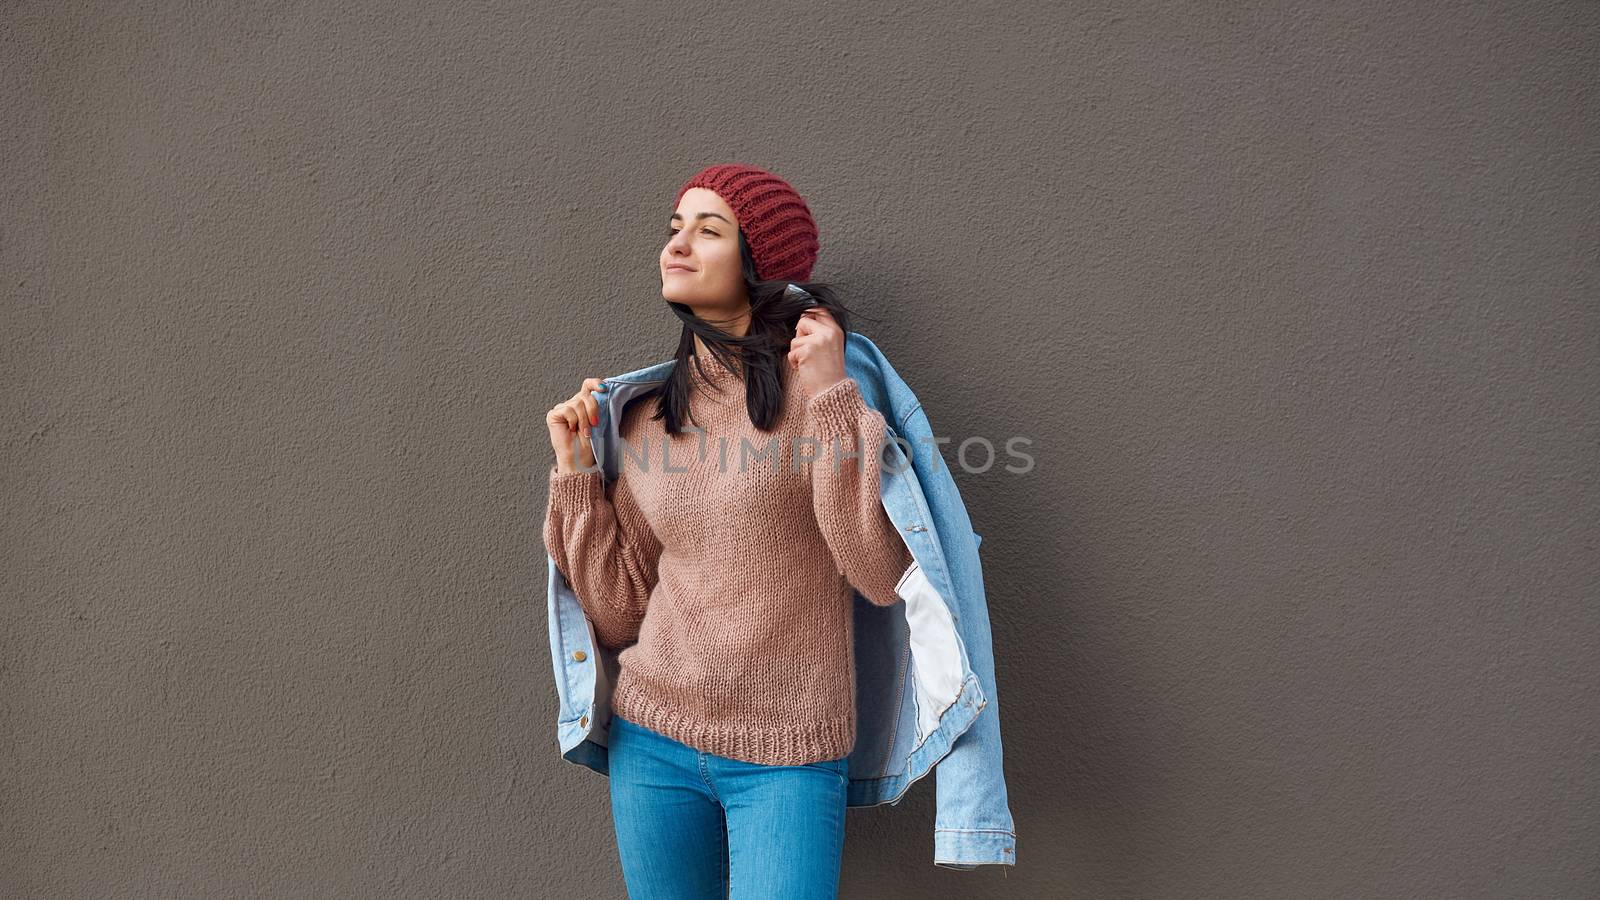 Pleasant young lady in stylish attire wrapping herself up in denim coat while looking aside near a large wall